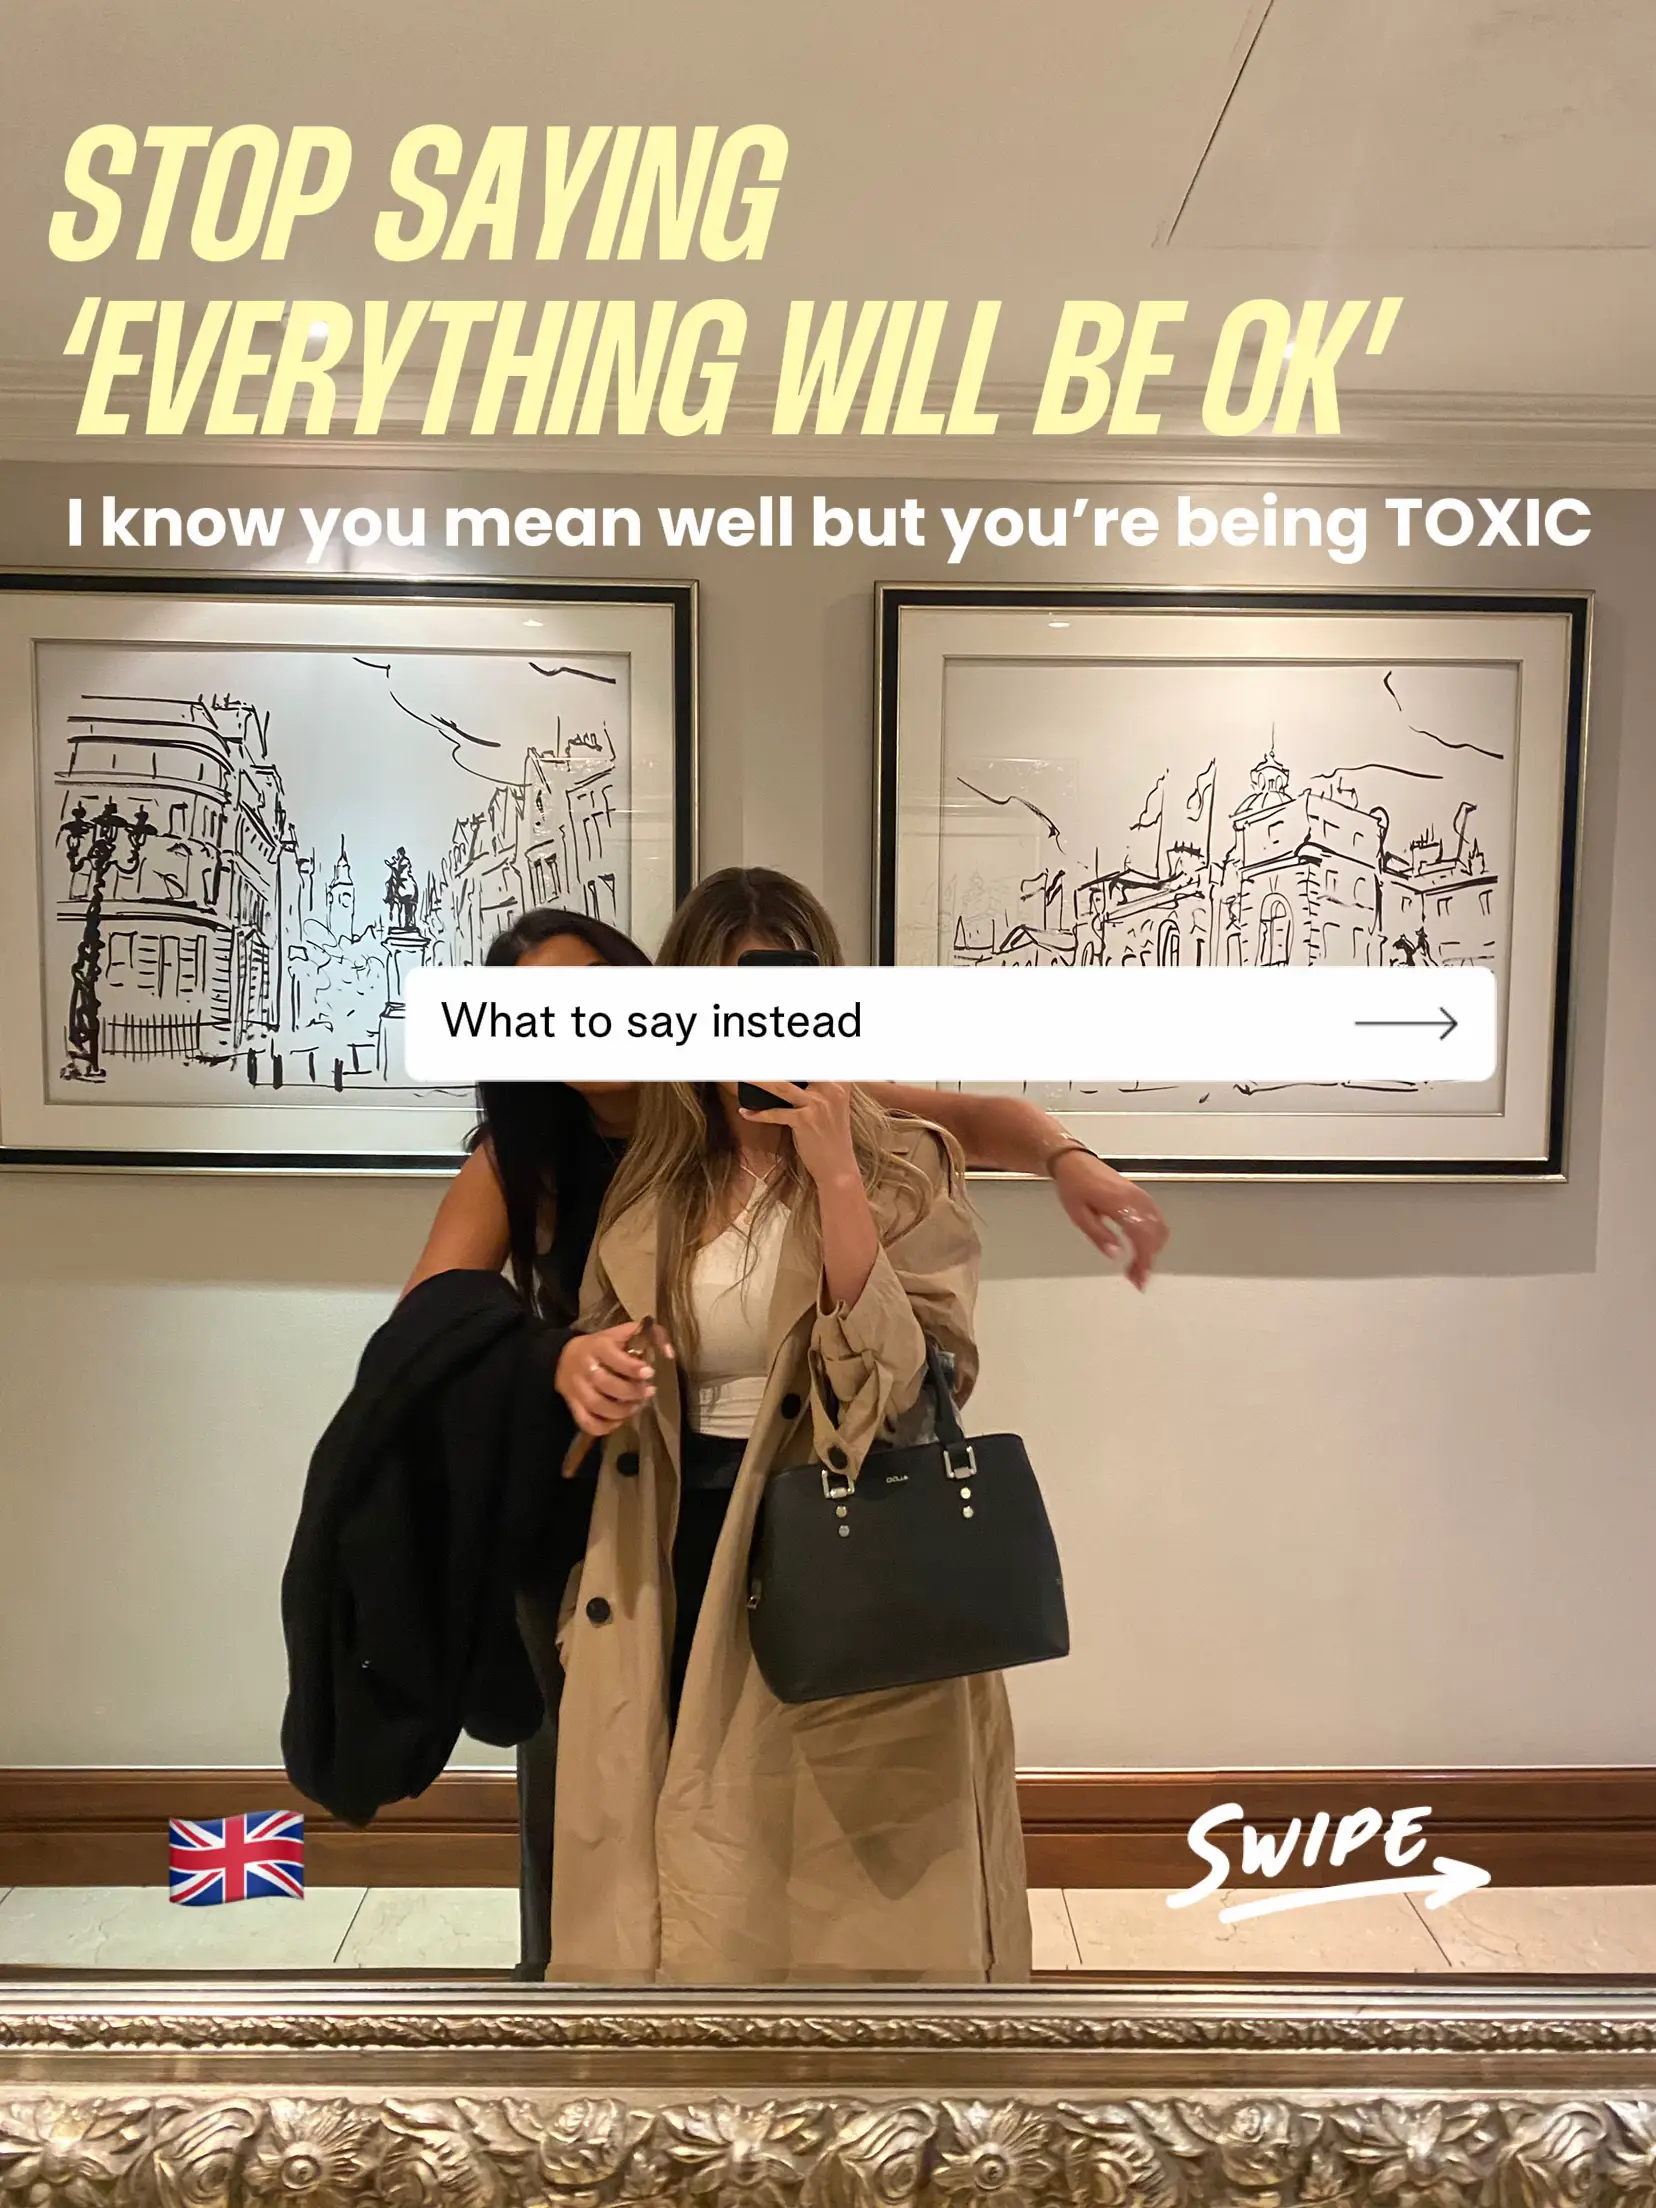  Two women are standing in a hallway, one of them holding a purse. The image is captioned with the words "I know you mean well but you're being TO